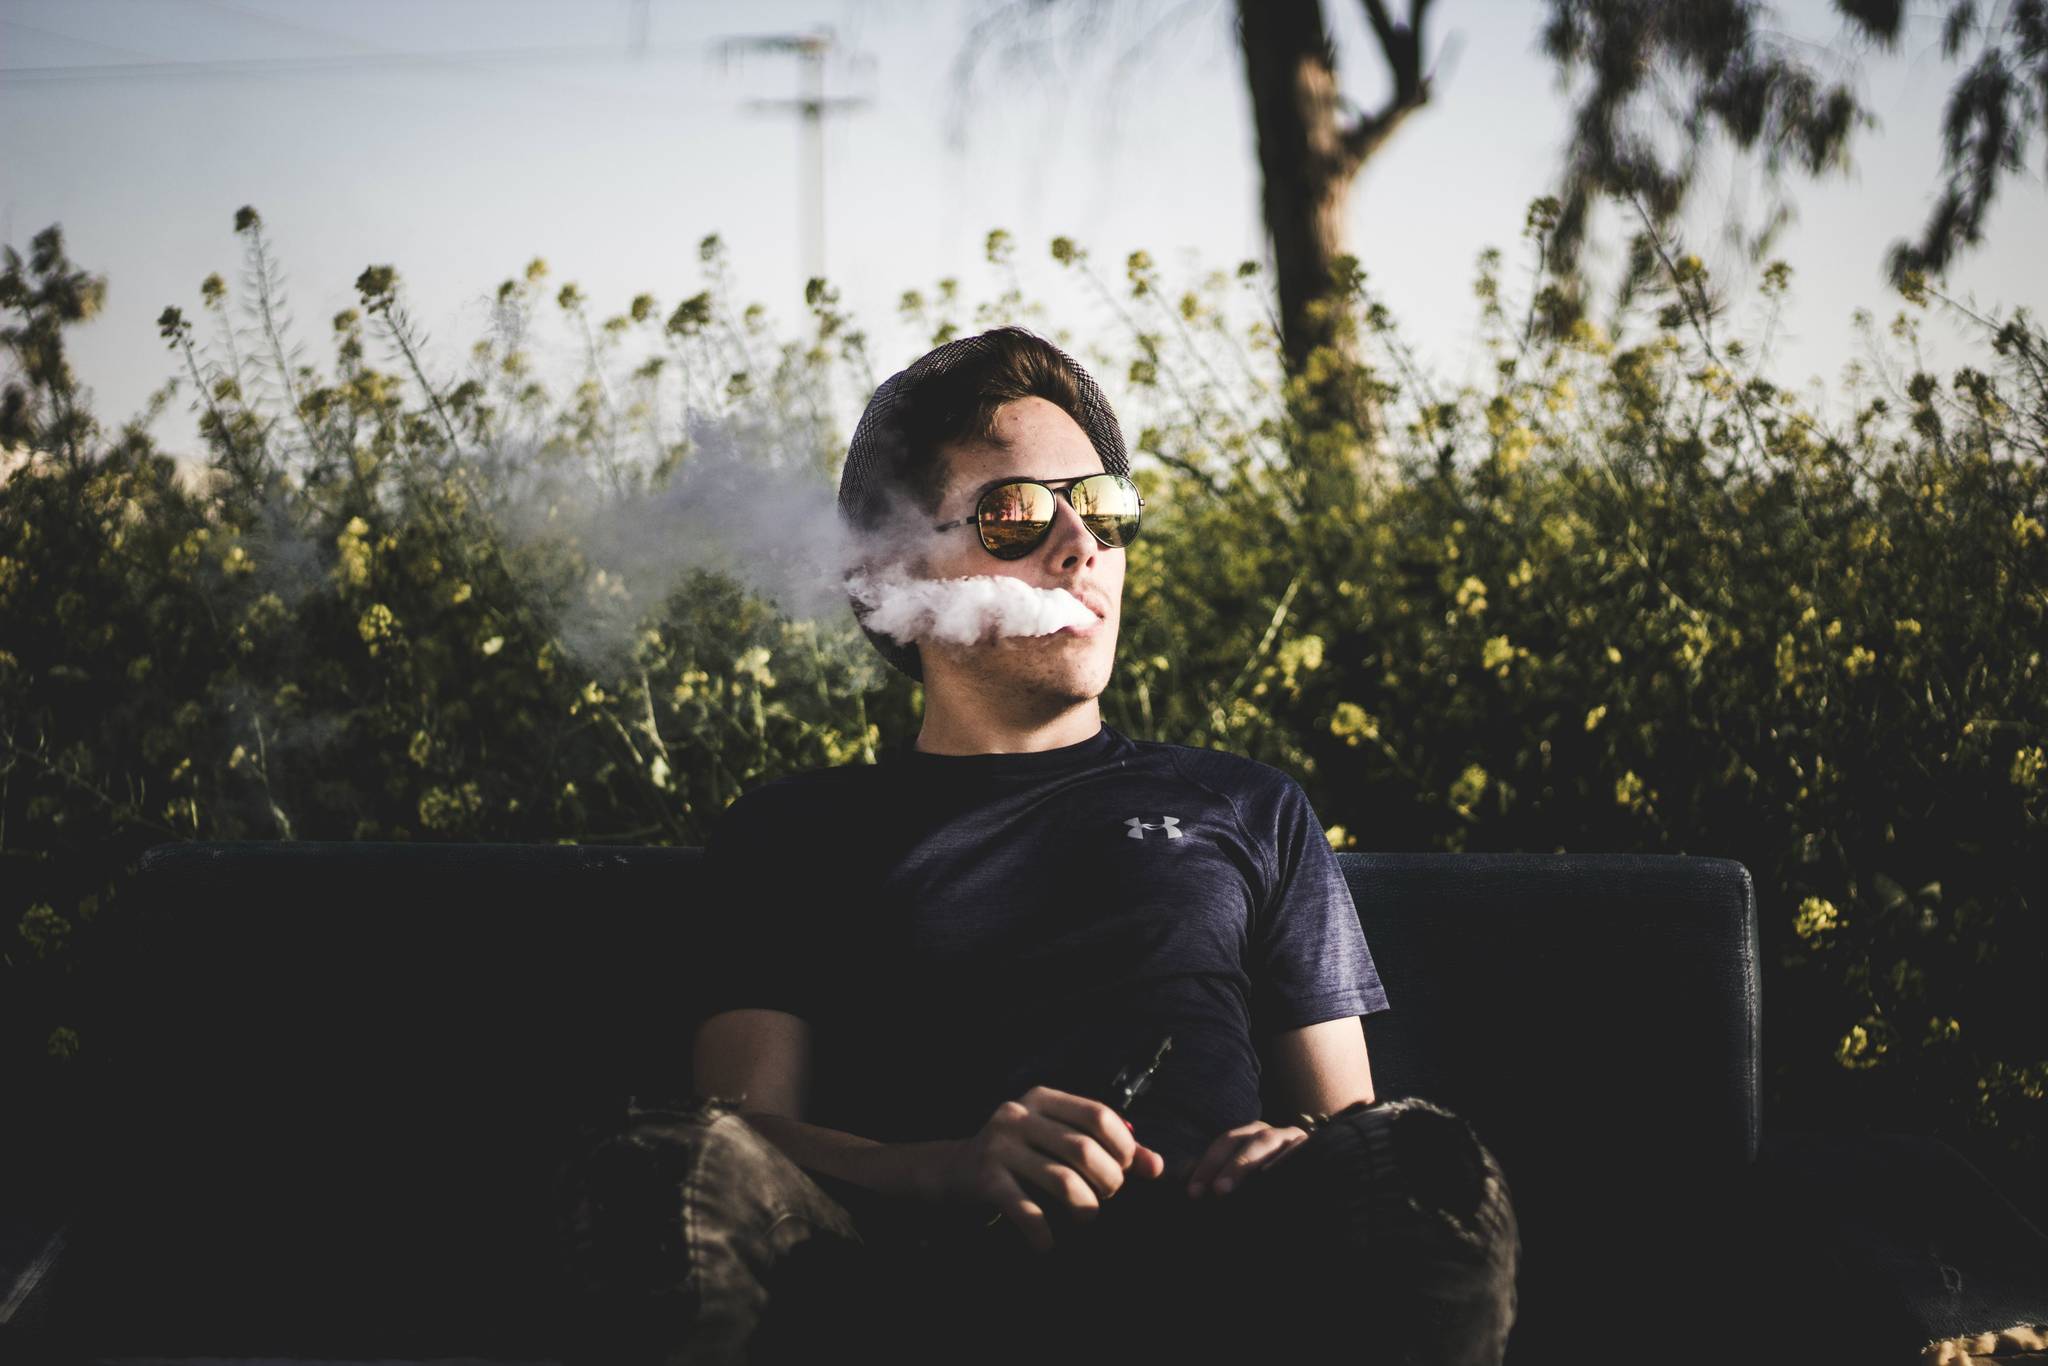 People are confused about the risks of teenage vaping